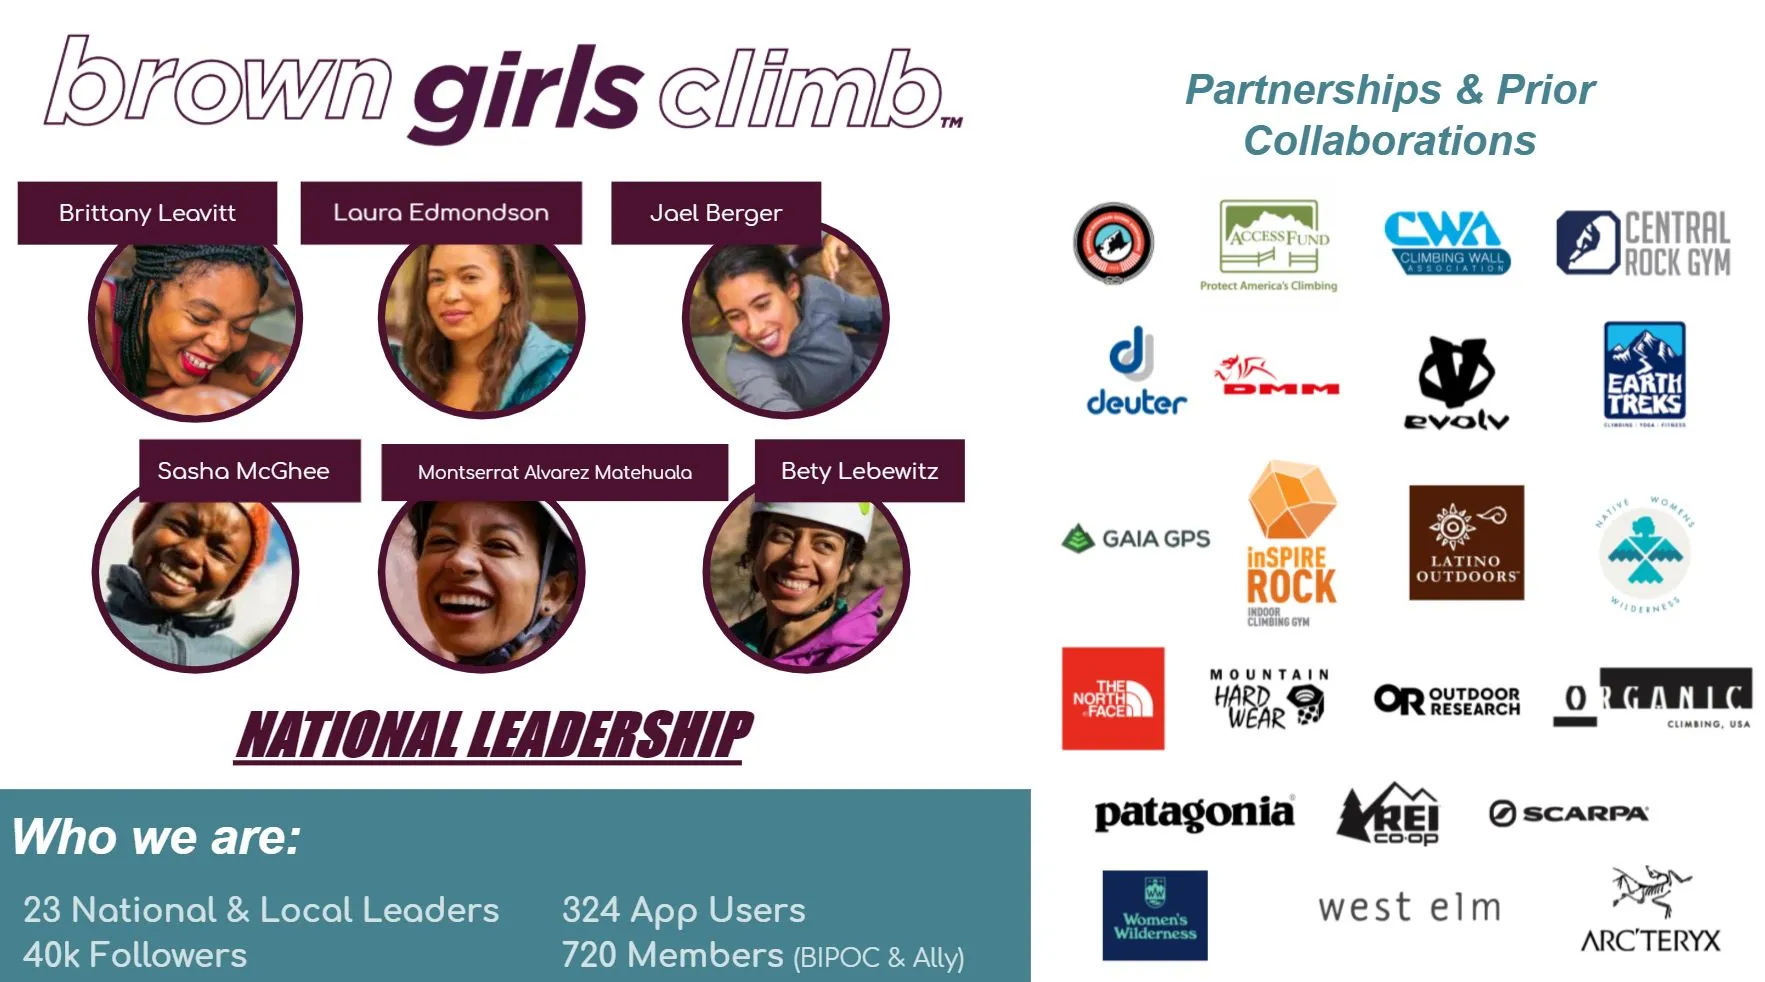 The Brown Girls Climb Team, Partnerships & Collaborations, and Quick Facts